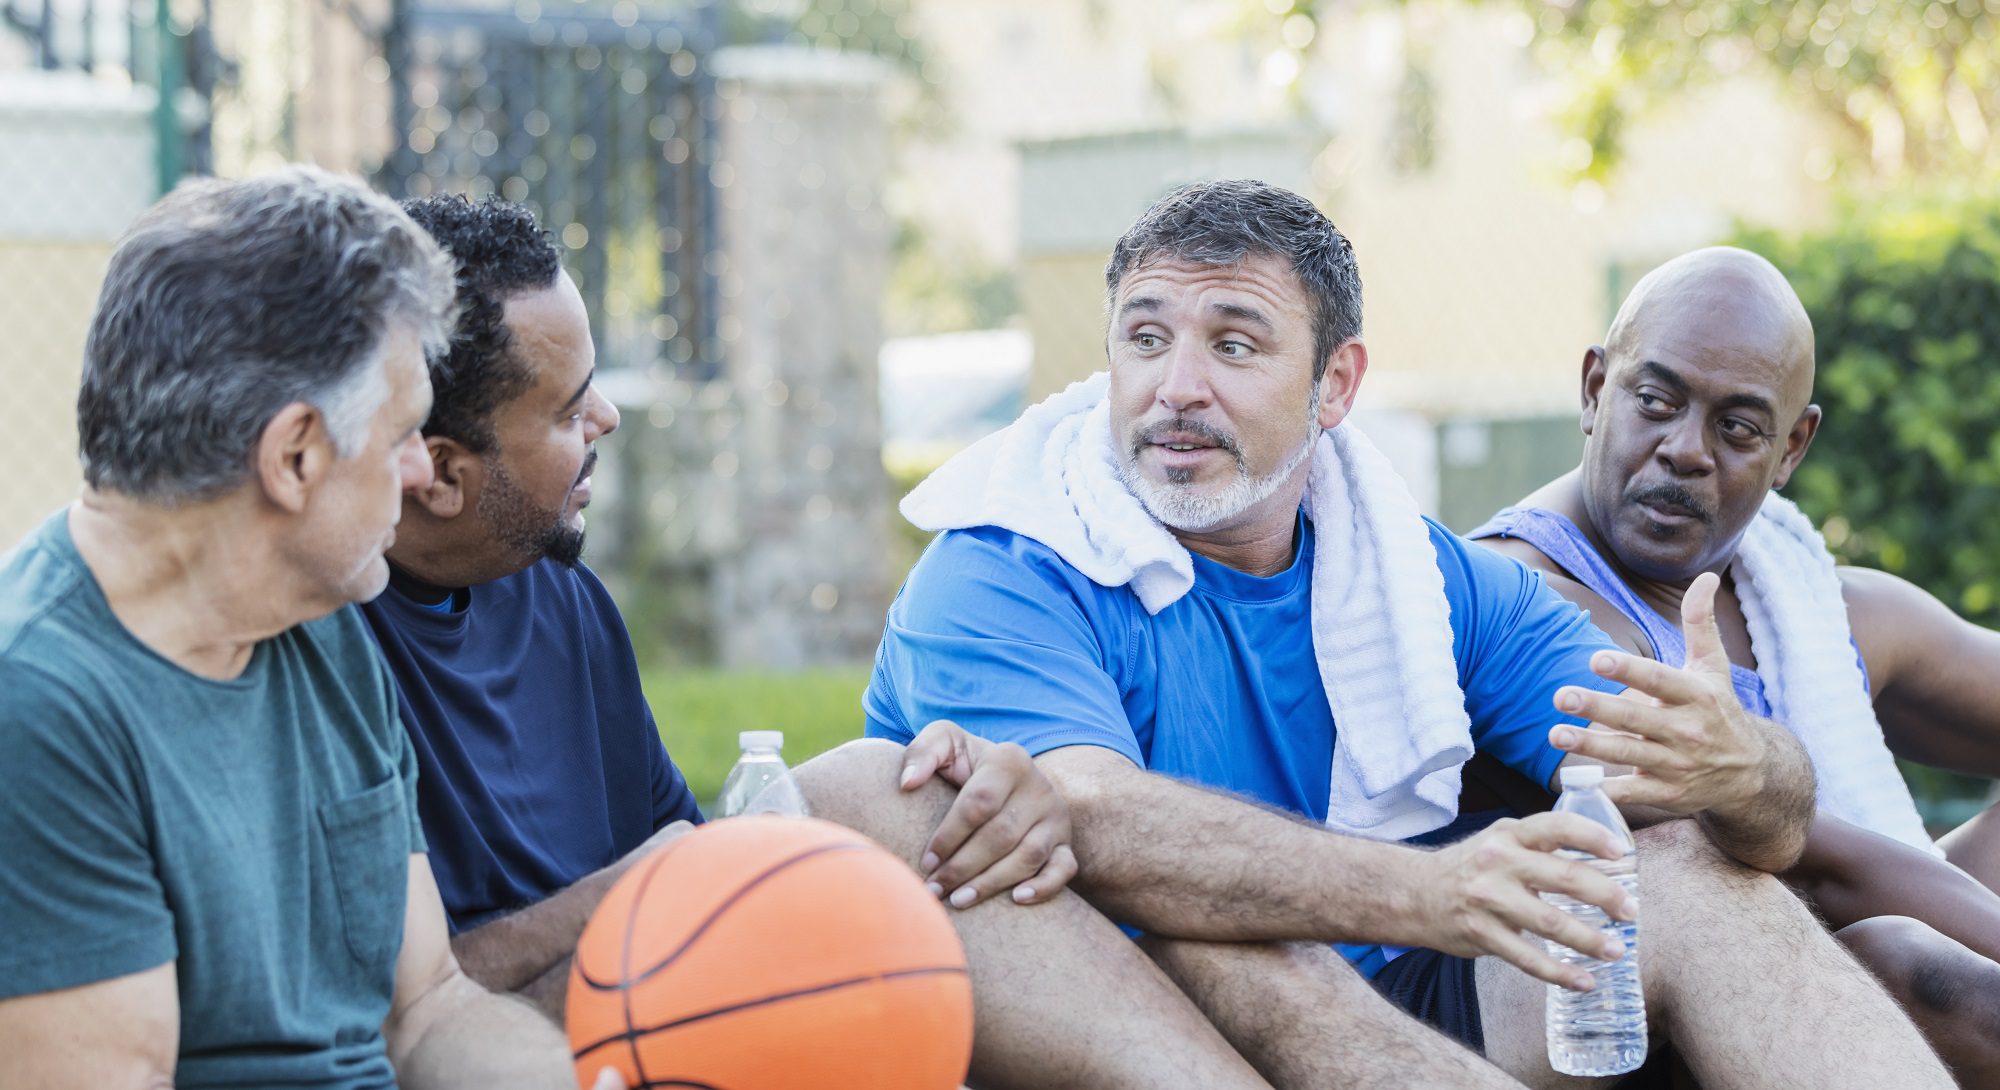 four men sitting with a basketball and drinking water